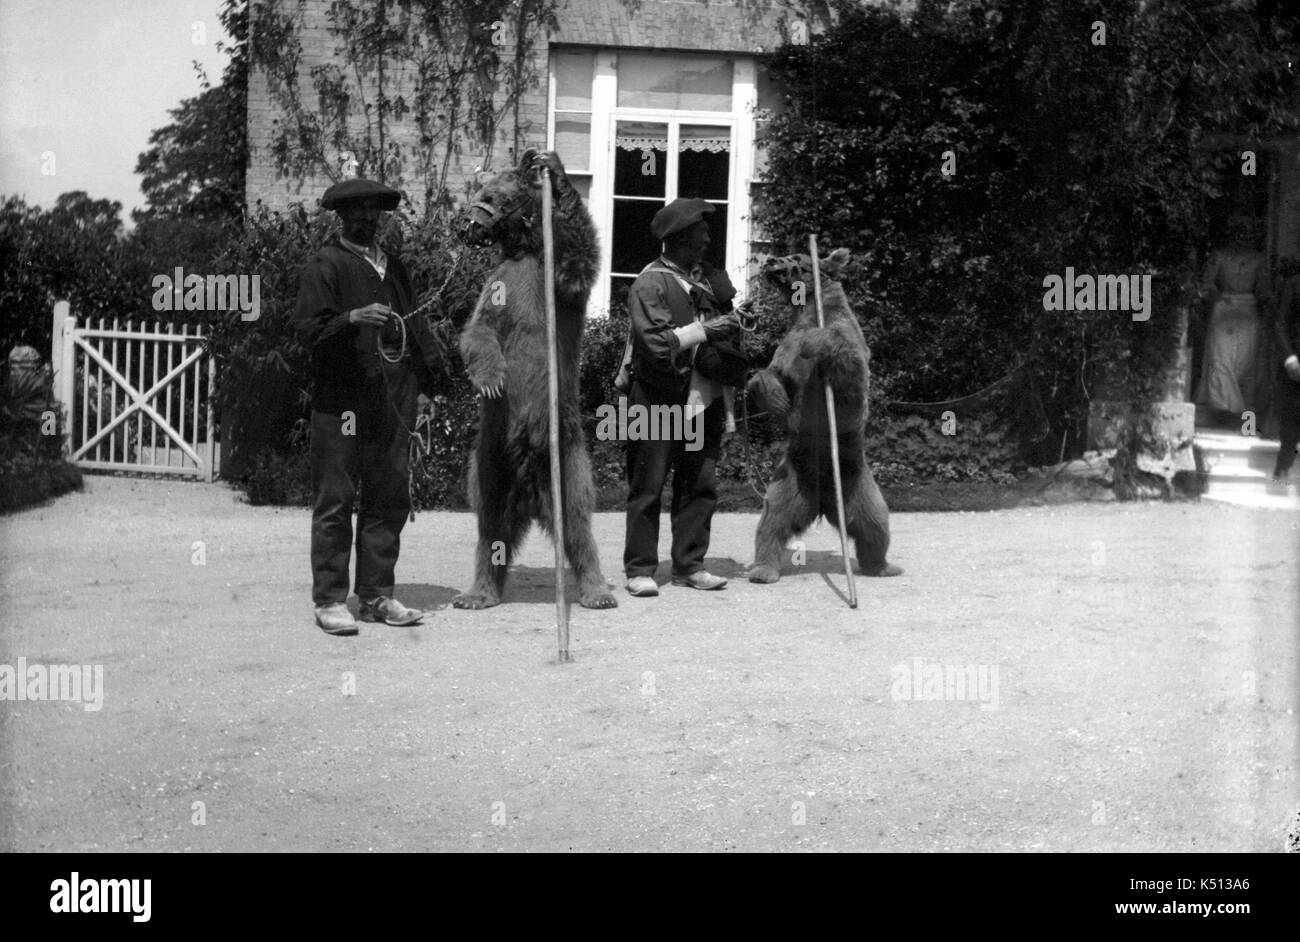 AJAXNETPHOTO. 1900 - 1910 (APPROX) LOCATION UNKNOWN. - PERFORMING BEARS - TRAINERS WEARING BASQUE TYPE BERETS AND TWO BEARS IN FRONT OF A RESIDENTIAL PROPERTY, POSSIBLY IN FRANCE. PHOTOGRAPHER:UNKNOWN © DIGITAL IMAGE COPYRIGHT AJAX VINTAGE PICTURE LIBRARY SOURCE: AJAX VINTAGE PICTURE LIBRARY COLLECTION REF:()AVL PEO PERFORMING BEARS 1900 03 Stock Photo